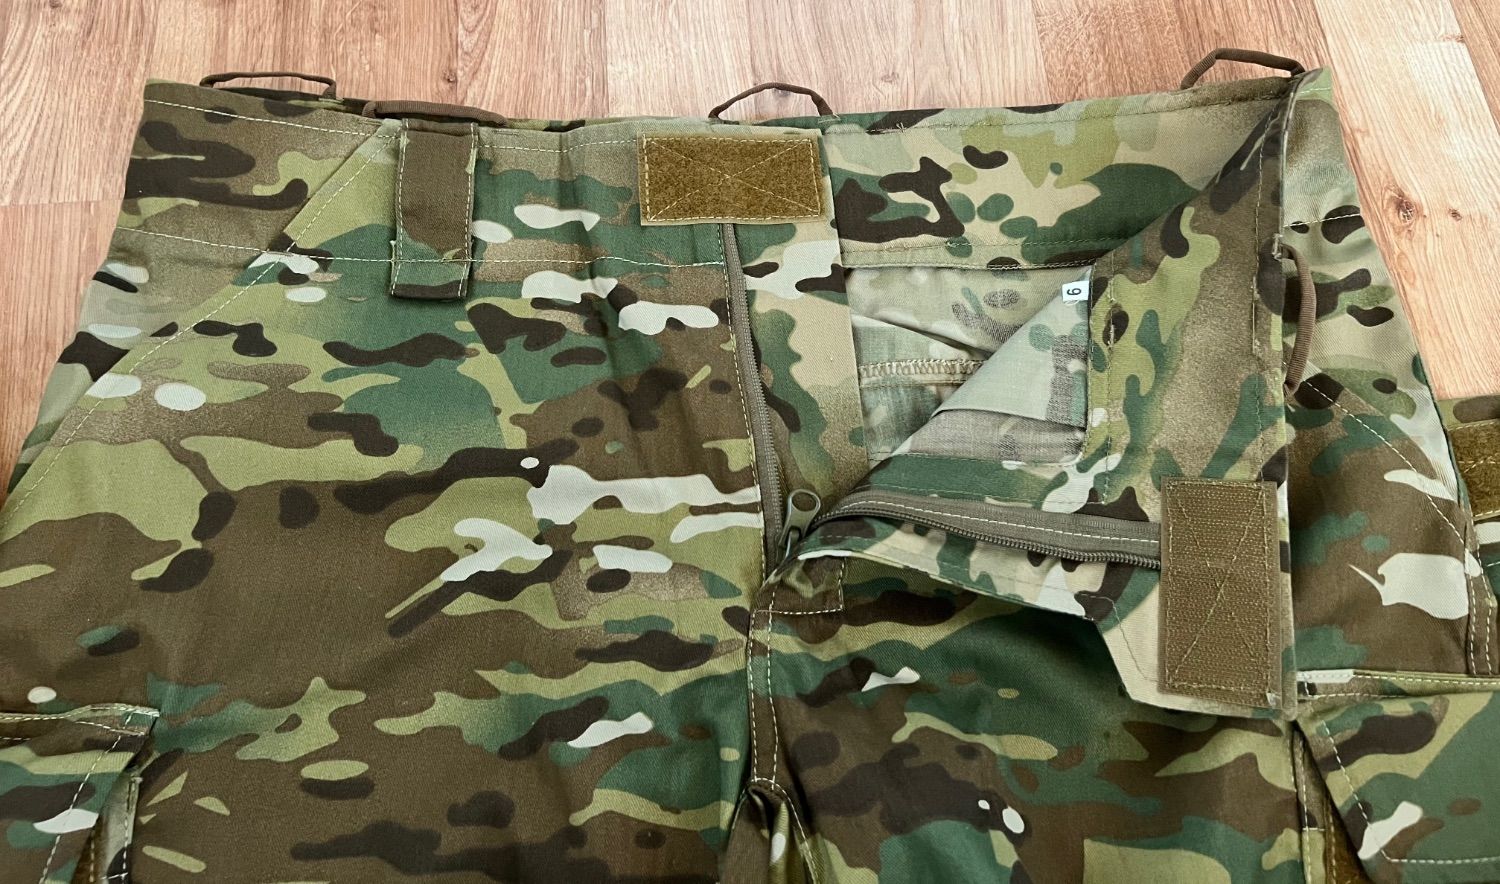 Russian VOIN pants - Gear - Airsoft Forums UK